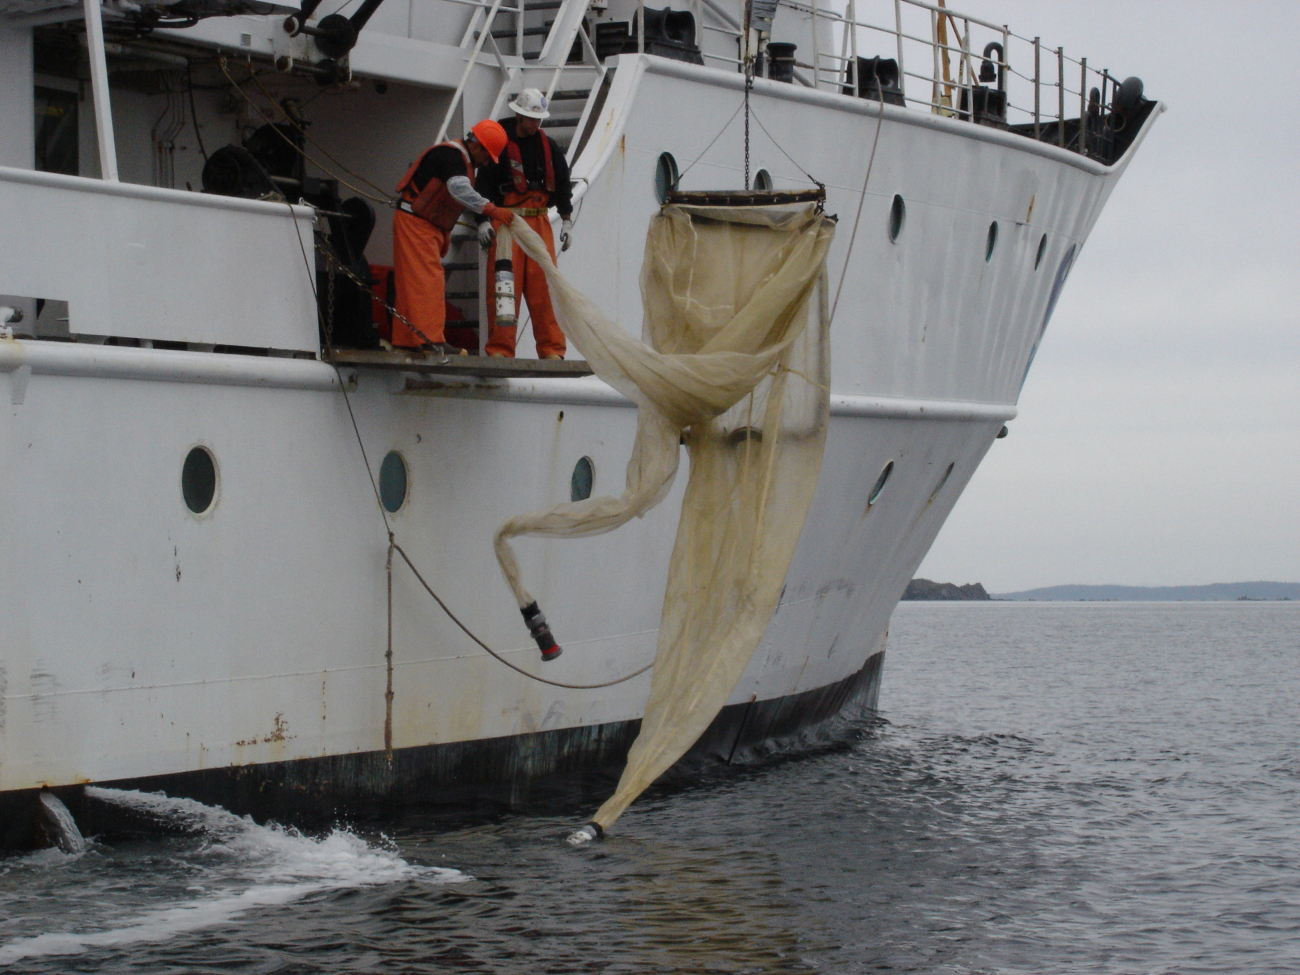 Recovering plankton tow nets